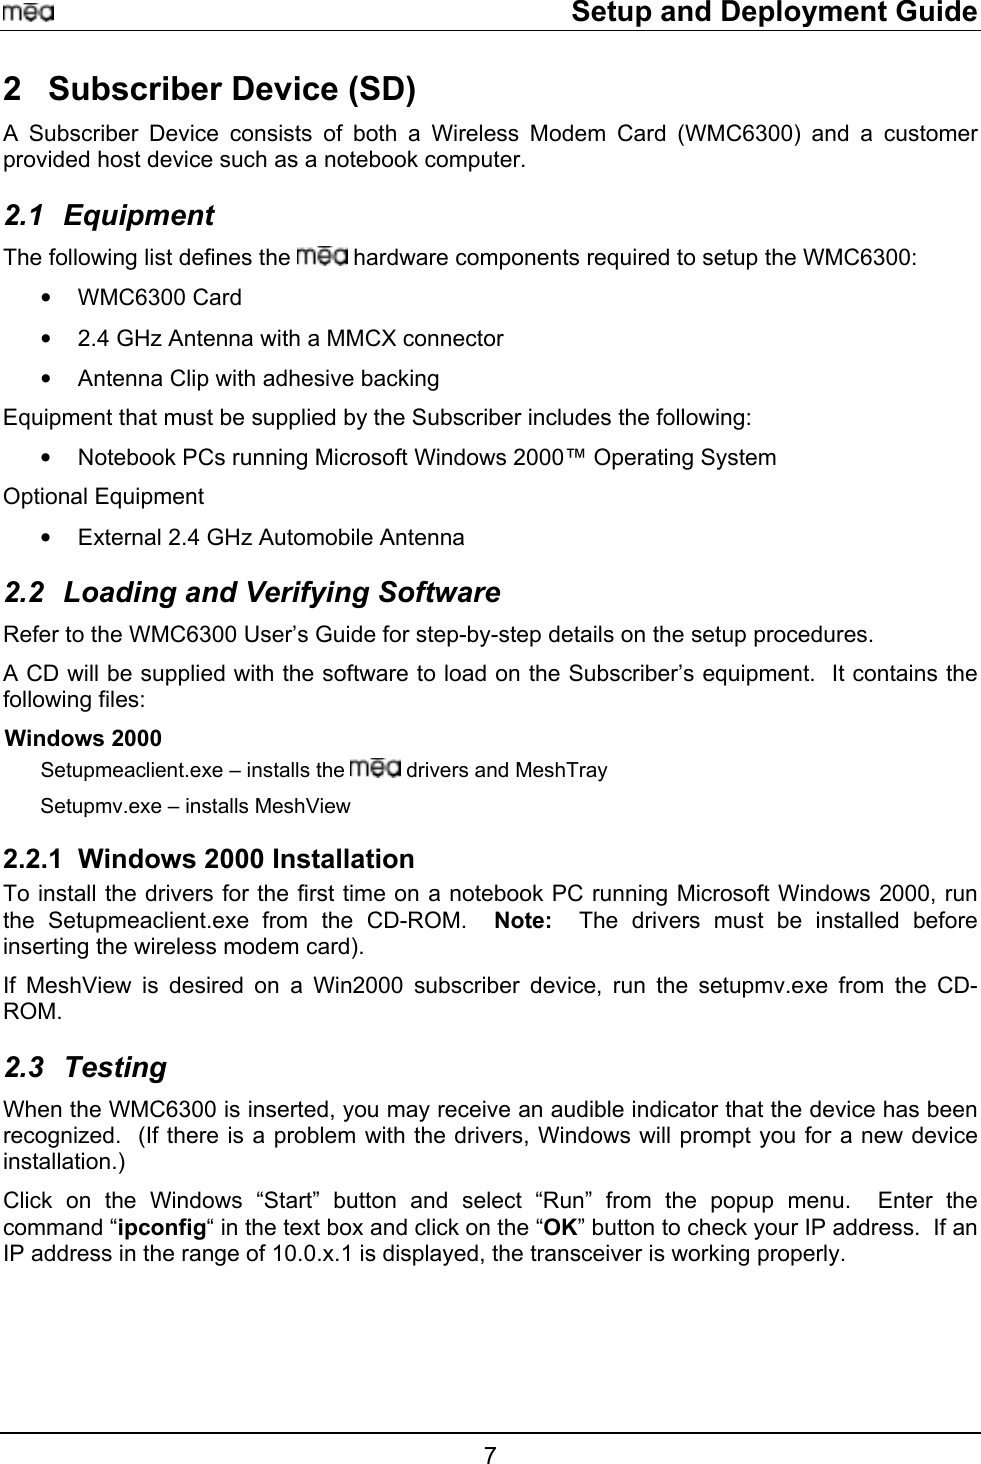     Setup and Deployment Guide 2  Subscriber Device (SD) A Subscriber Device consists of both a Wireless Modem Card (WMC6300) and a customer provided host device such as a notebook computer.   2.1 Equipment The following list defines the   hardware components required to setup the WMC6300: •  WMC6300 Card •  2.4 GHz Antenna with a MMCX connector •  Antenna Clip with adhesive backing Equipment that must be supplied by the Subscriber includes the following: •  Notebook PCs running Microsoft Windows 2000™ Operating System  Optional Equipment  •  External 2.4 GHz Automobile Antenna  2.2  Loading and Verifying Software Refer to the WMC6300 User’s Guide for step-by-step details on the setup procedures.   A CD will be supplied with the software to load on the Subscriber’s equipment.  It contains the following files: Windows 2000 Setupmeaclient.exe – installs the   drivers and MeshTray  Setupmv.exe – installs MeshView  2.2.1 Windows 2000 Installation To install the drivers for the first time on a notebook PC running Microsoft Windows 2000, run the Setupmeaclient.exe from the CD-ROM.  Note:  The drivers must be installed before inserting the wireless modem card).   If MeshView is desired on a Win2000 subscriber device, run the setupmv.exe from the CD-ROM. 2.3 Testing  When the WMC6300 is inserted, you may receive an audible indicator that the device has been recognized.  (If there is a problem with the drivers, Windows will prompt you for a new device installation.) Click on the Windows “Start” button and select “Run” from the popup menu.  Enter the command “ipconfig“ in the text box and click on the “OK” button to check your IP address.  If an IP address in the range of 10.0.x.1 is displayed, the transceiver is working properly. 7 